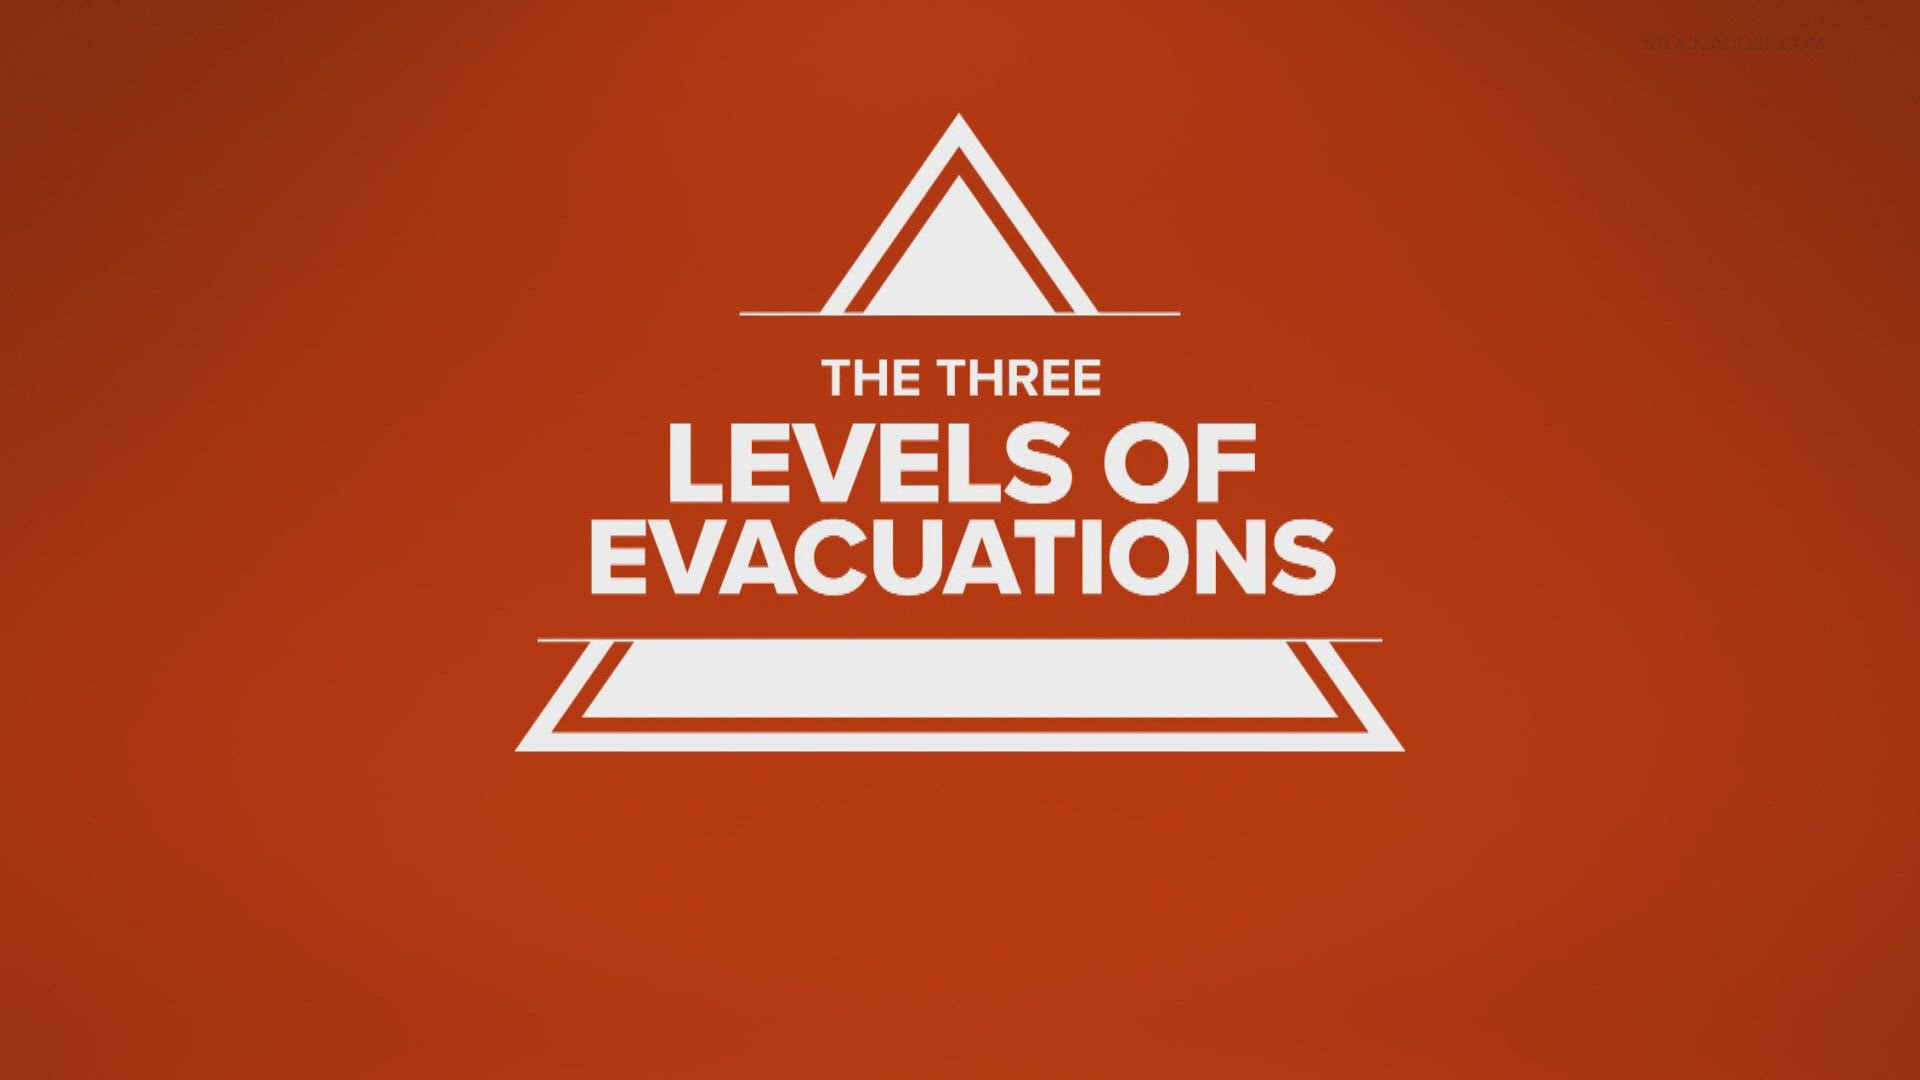 Different levels of evacuations require unique steps for residents during a wildfire.